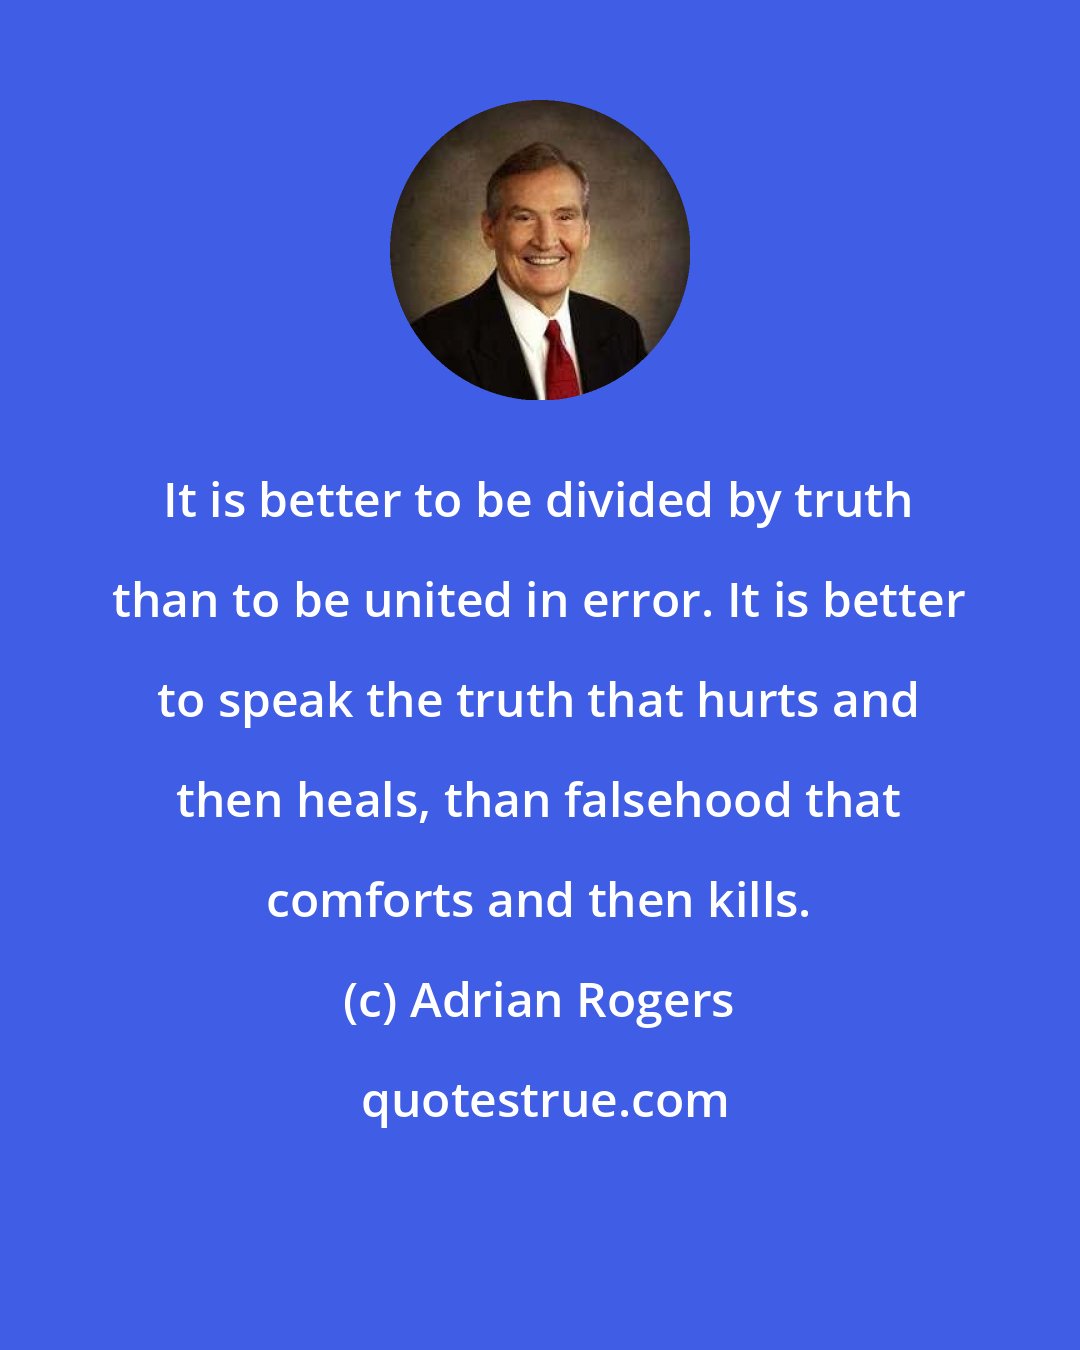 Adrian Rogers: It is better to be divided by truth than to be united in error. It is better to speak the truth that hurts and then heals, than falsehood that comforts and then kills.